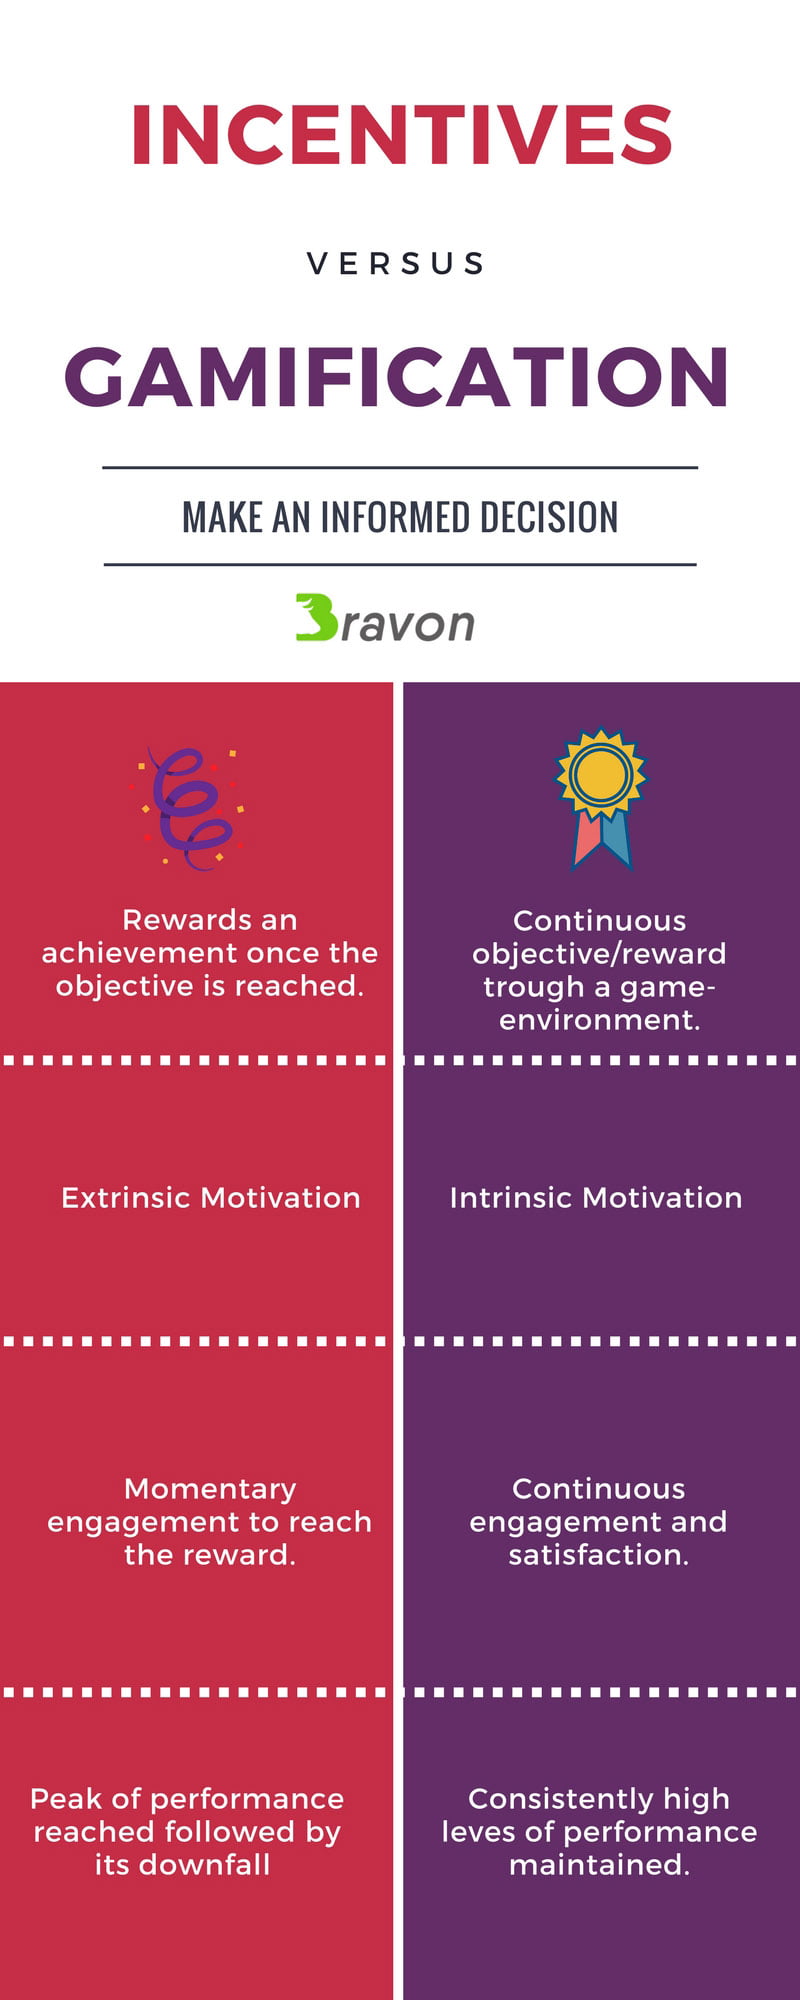 incentives-vs-gamification-bravon-gamification-platform-for-business